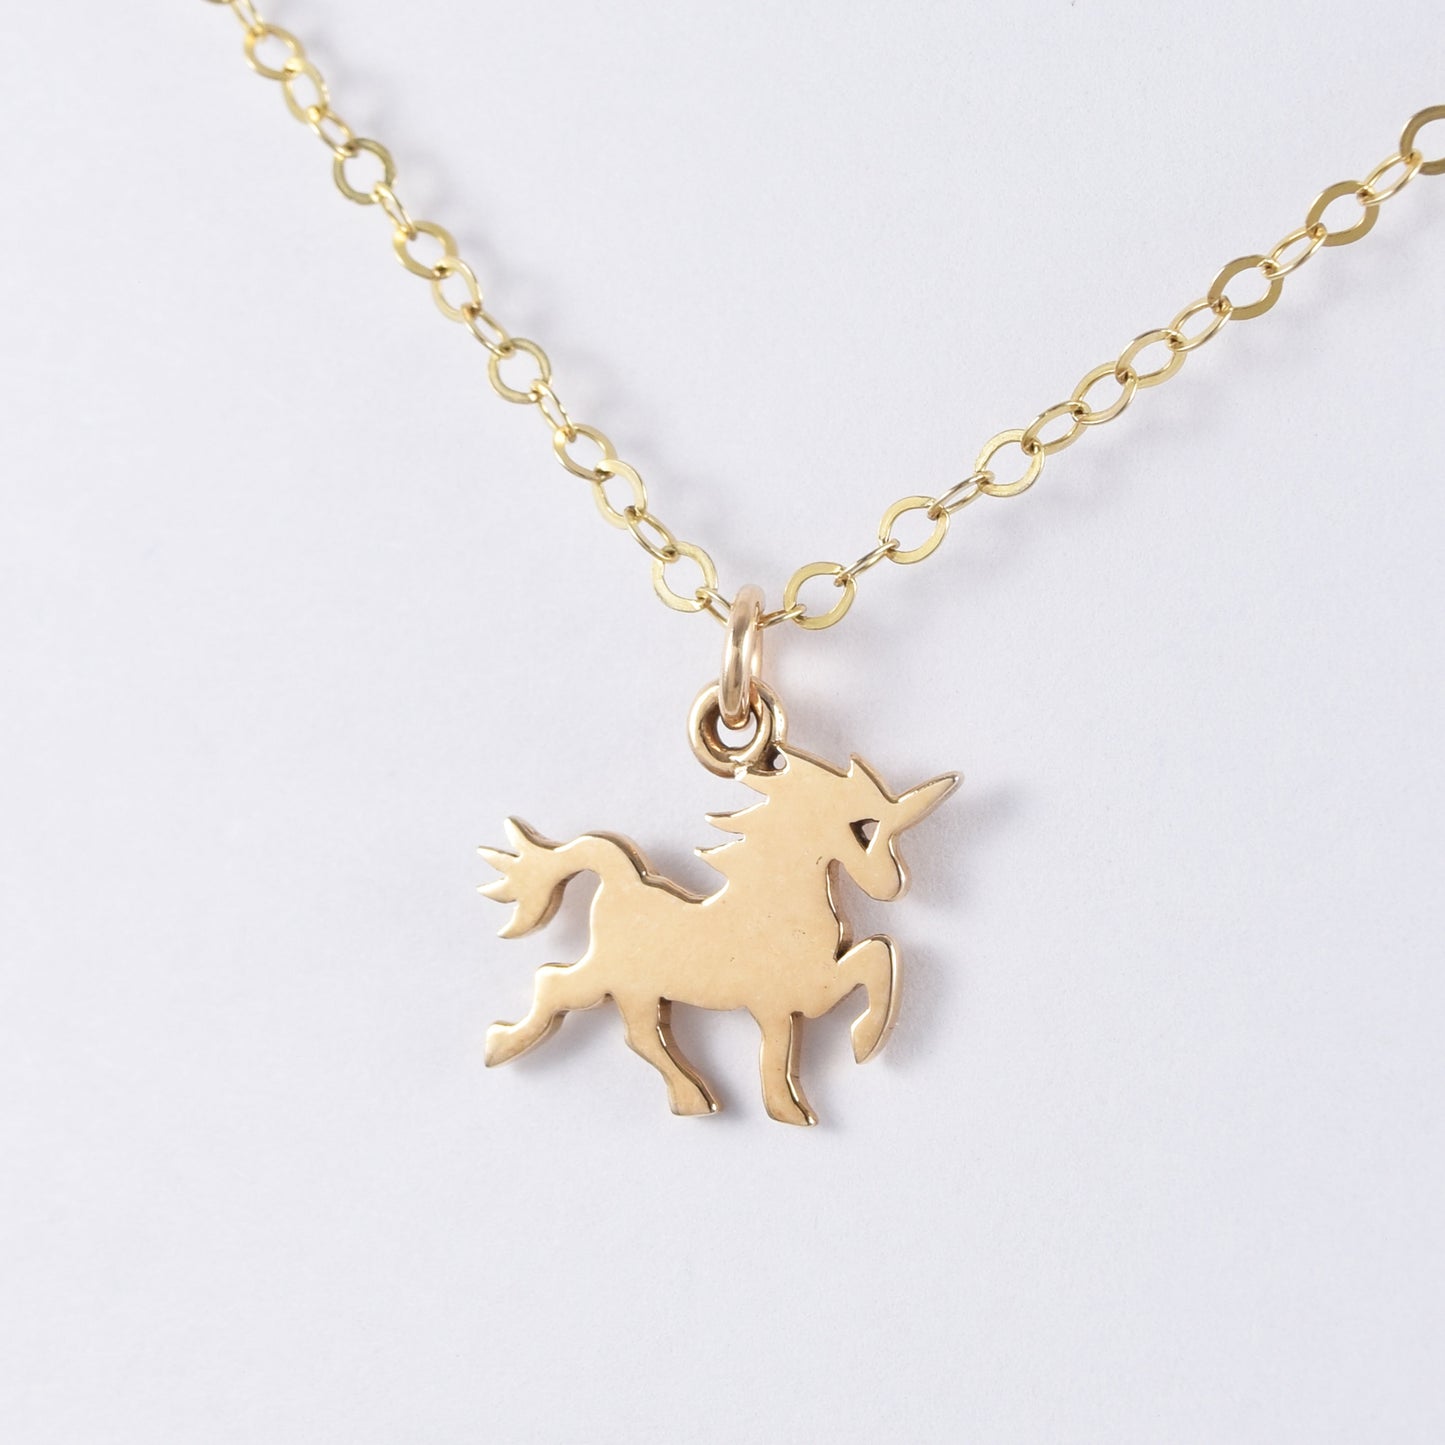 Gold Unicorn Charm Necklace, Fantasy Pendant, Gift for Tween Daughter, Present for Friend, Gift for Girl